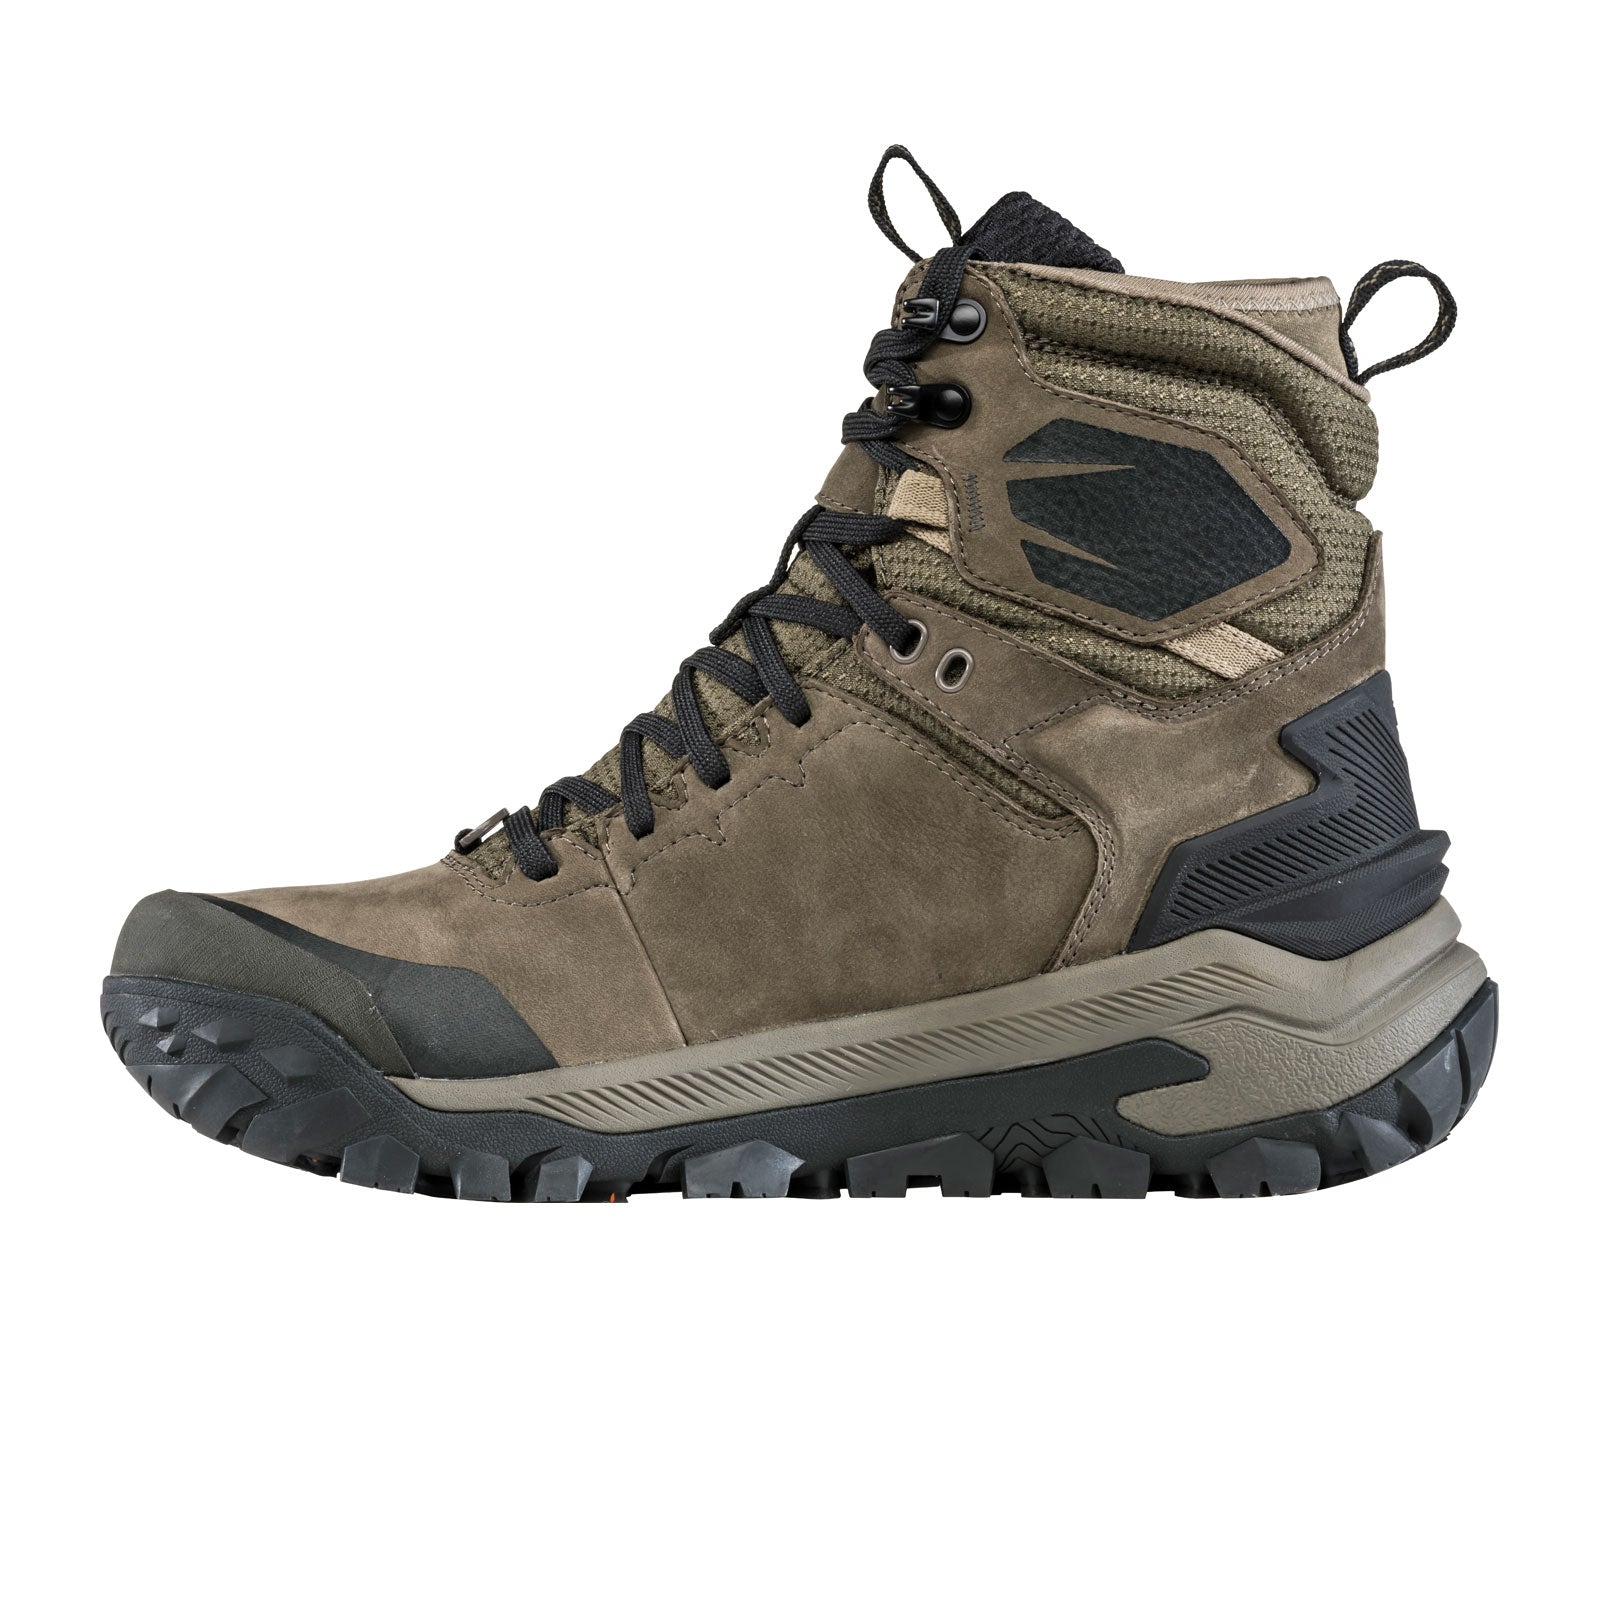 Oboz Bangtail Mid Insulated B-DRY Winter Boot (Men) - Sediment